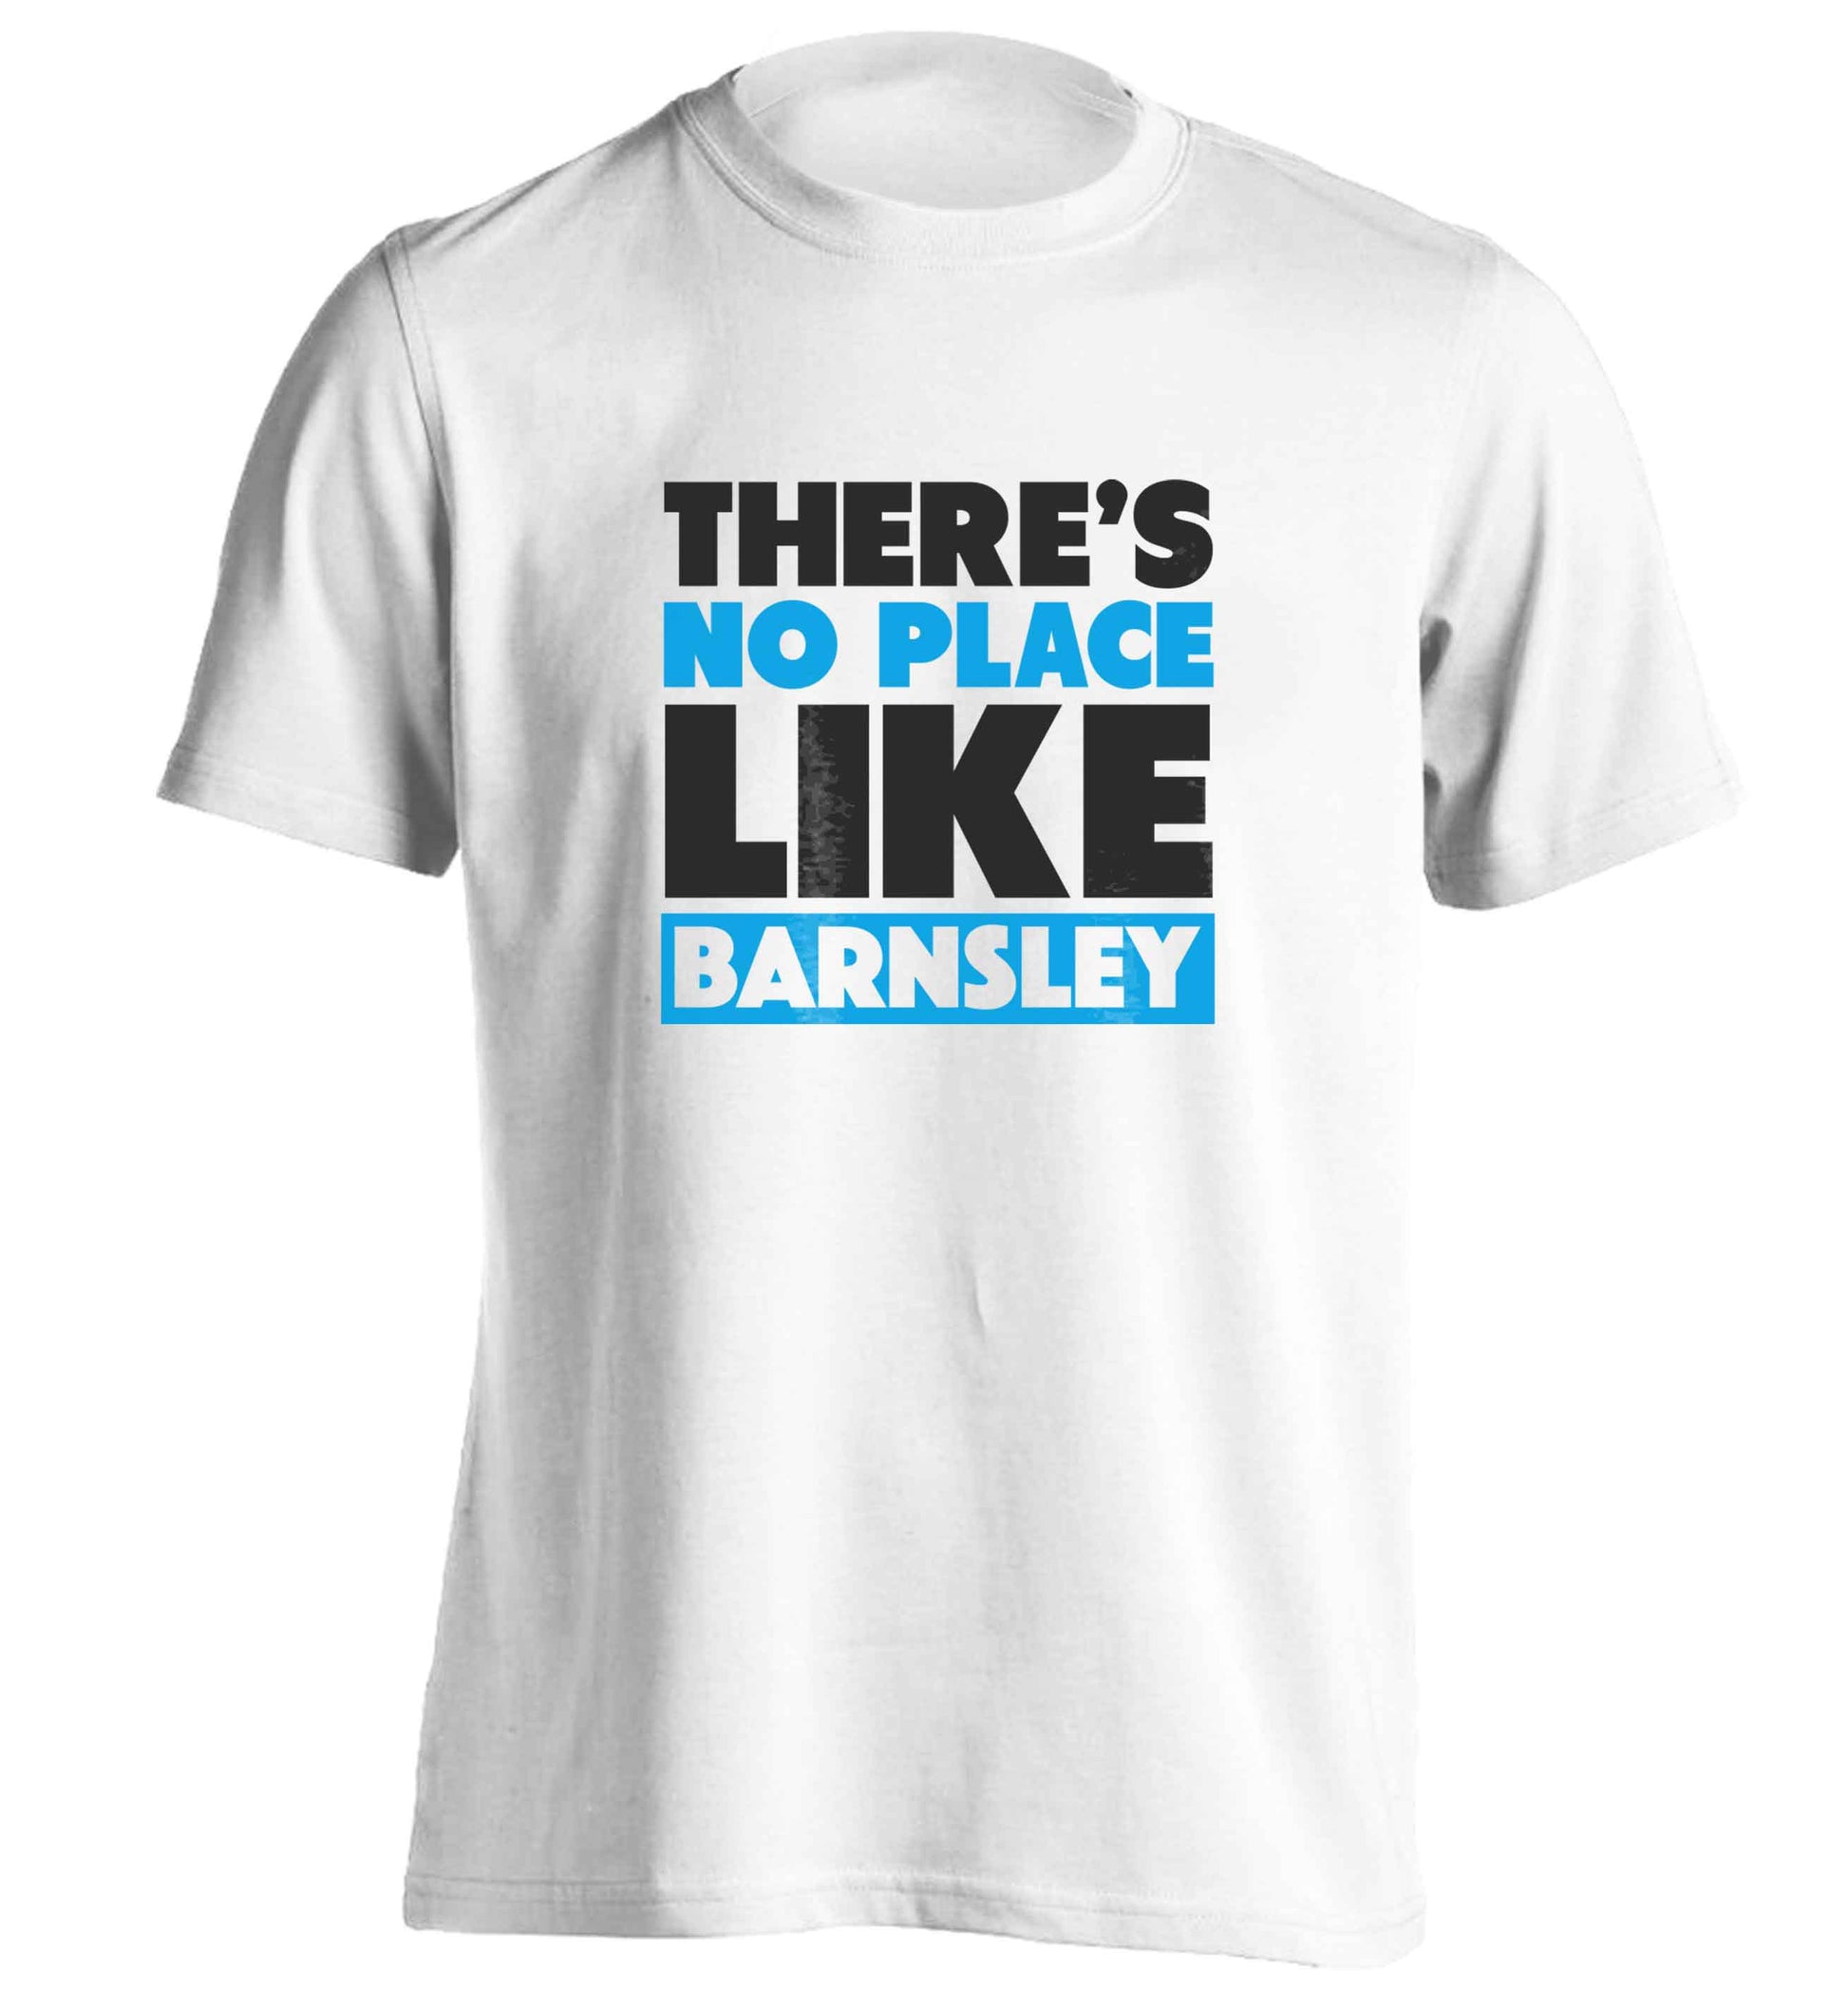 There's No Place Like Barnsley adults unisex white Tshirt 2XL